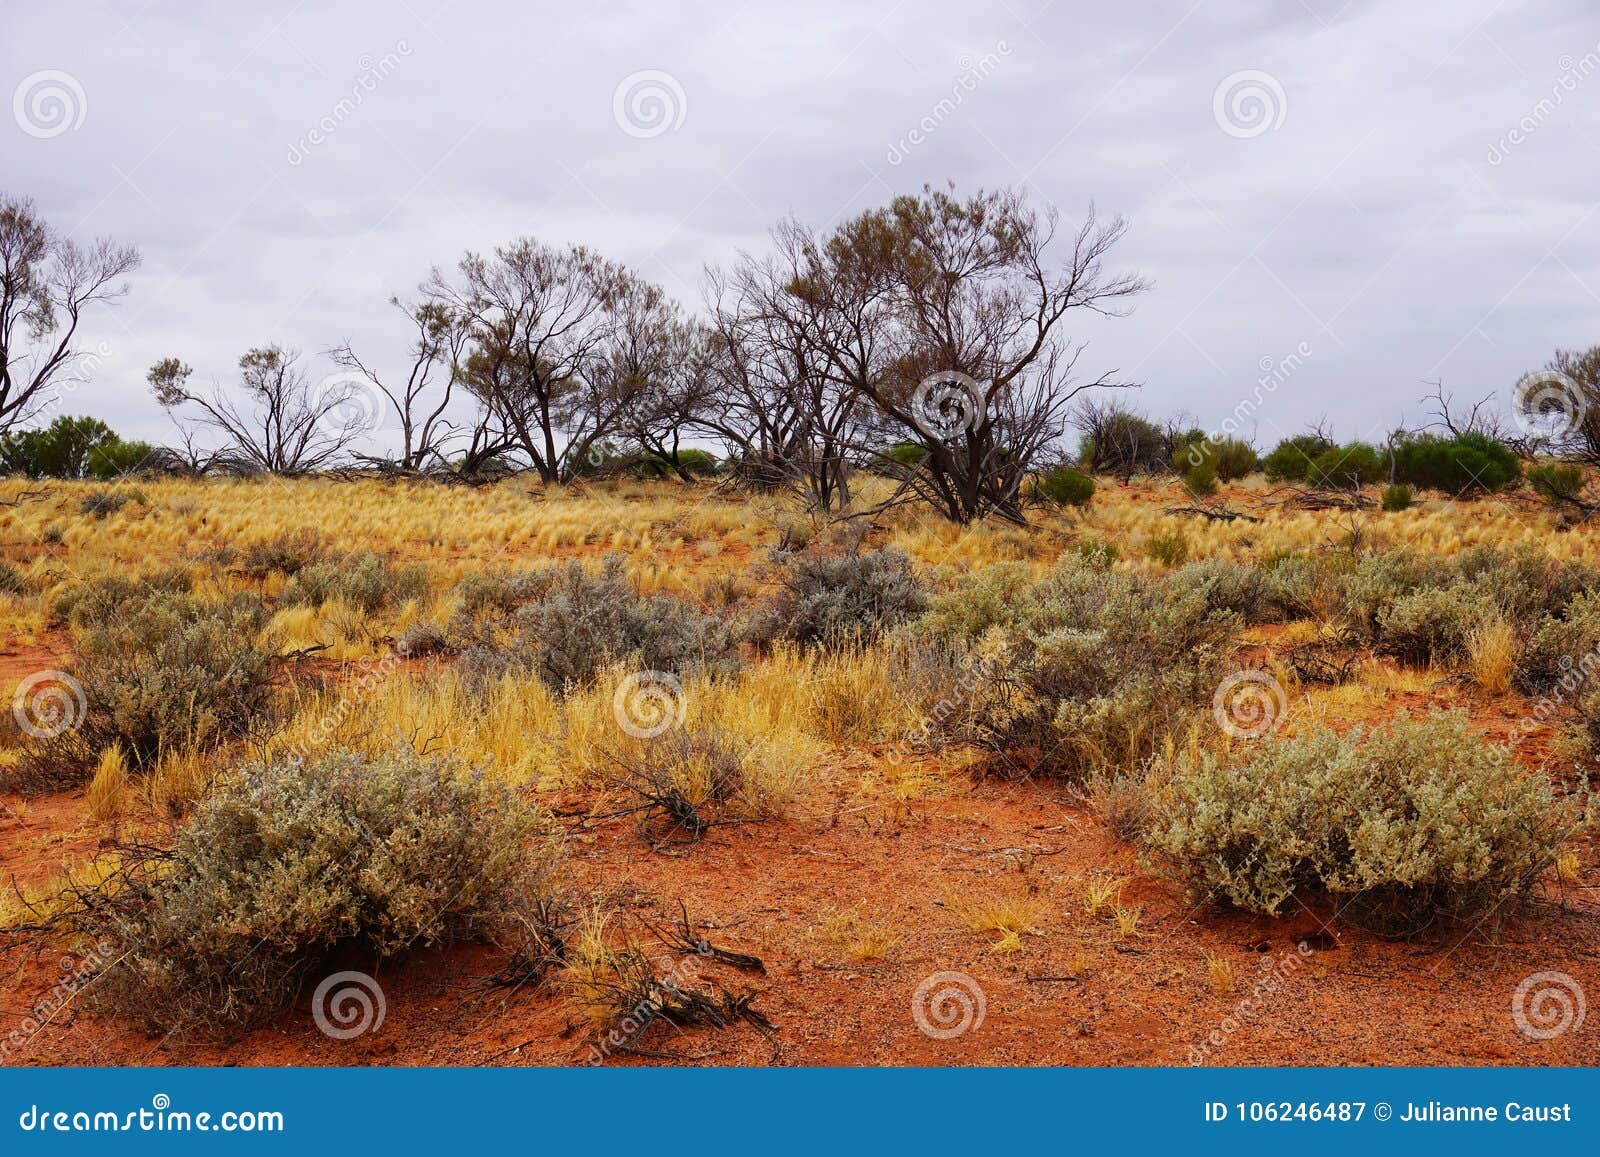 arid lands, roxy downs, outback south australia